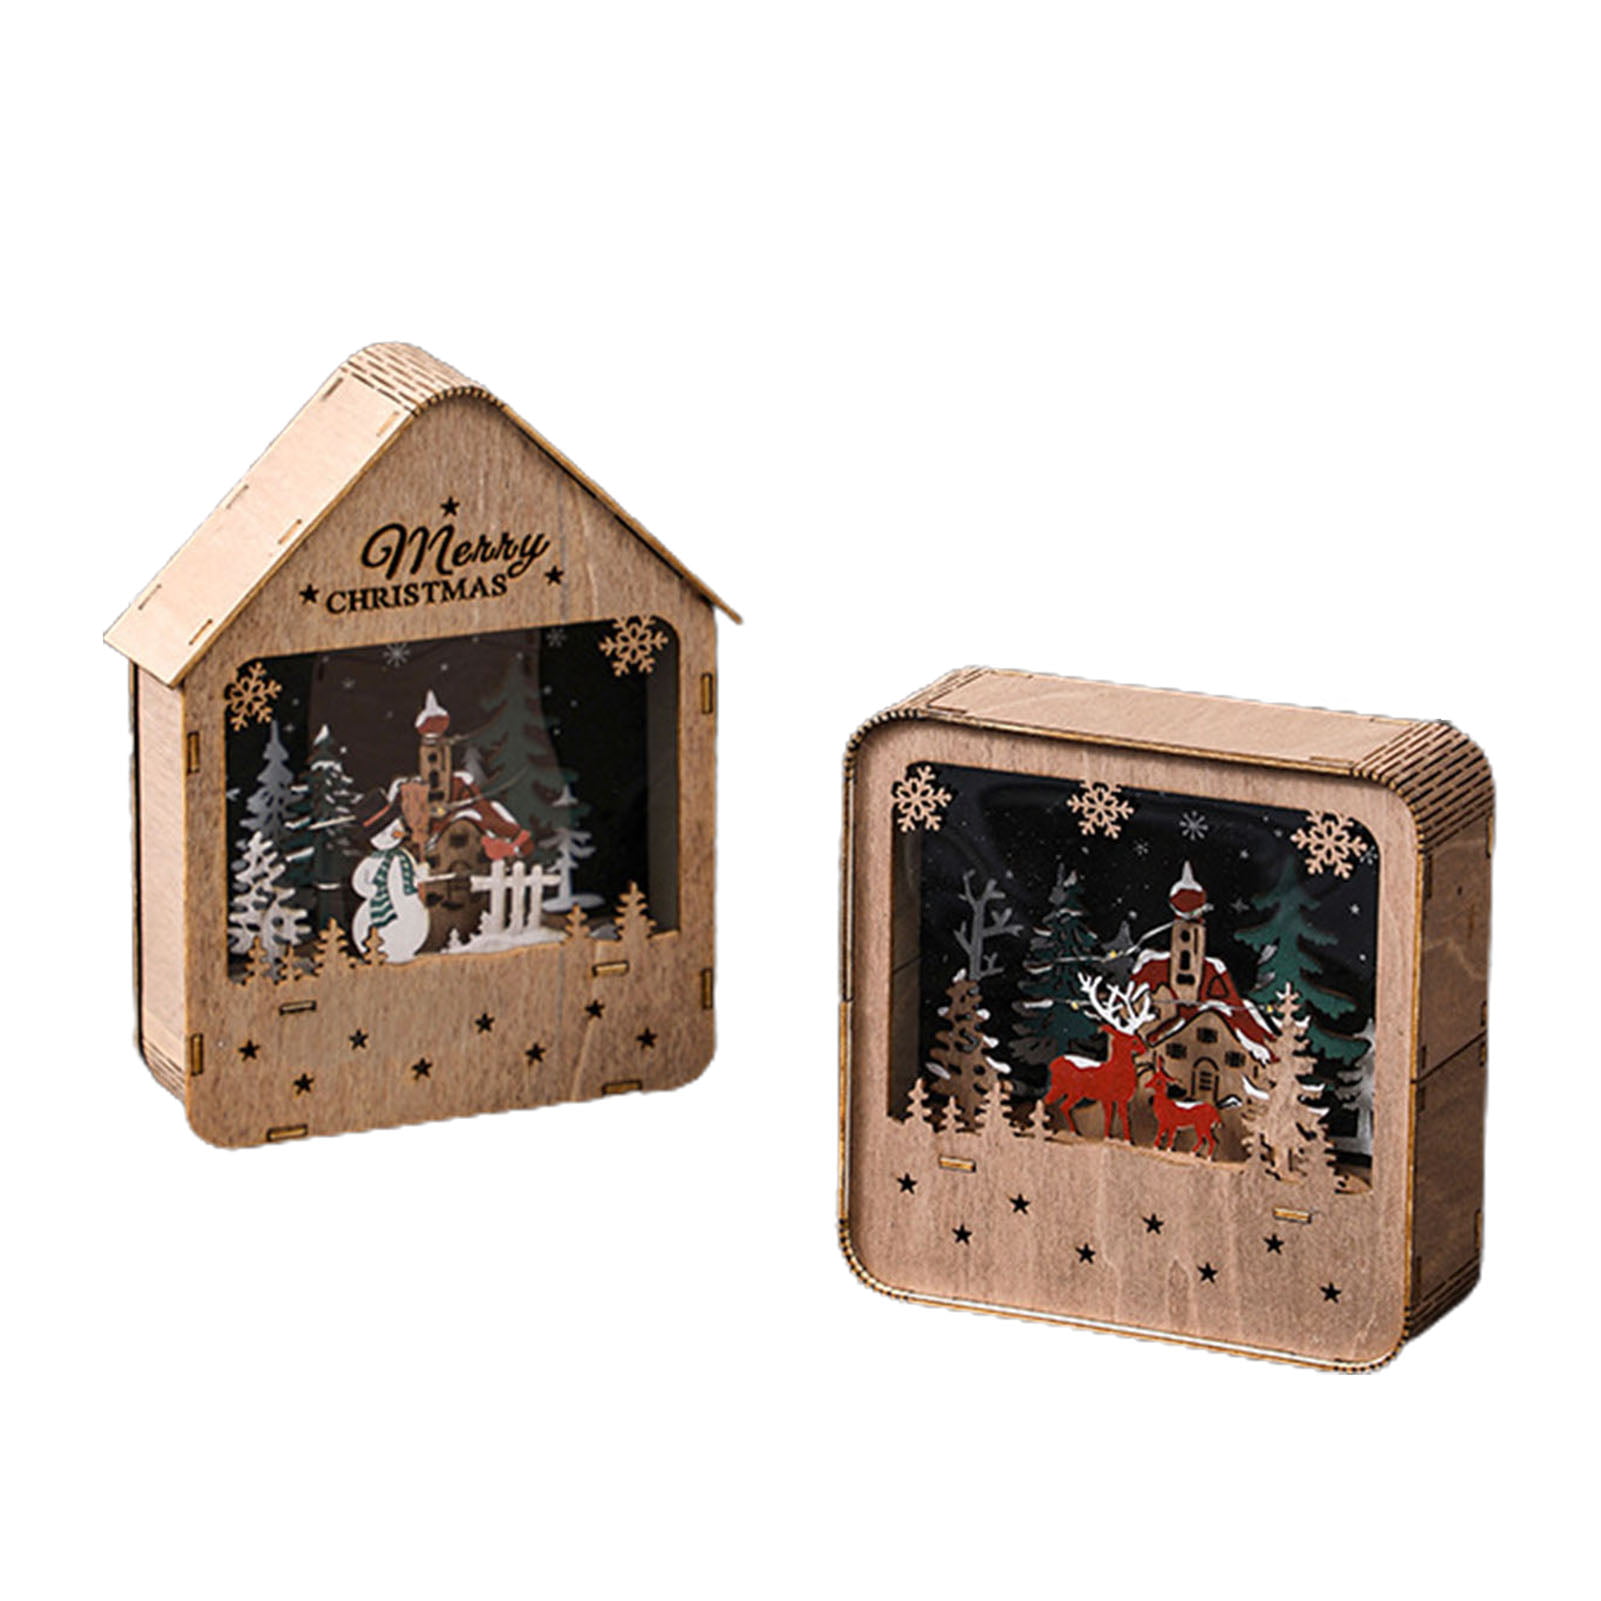 Wooden House with LED Light Festive Decoration Home Gift Christmas Tree L8Y2 